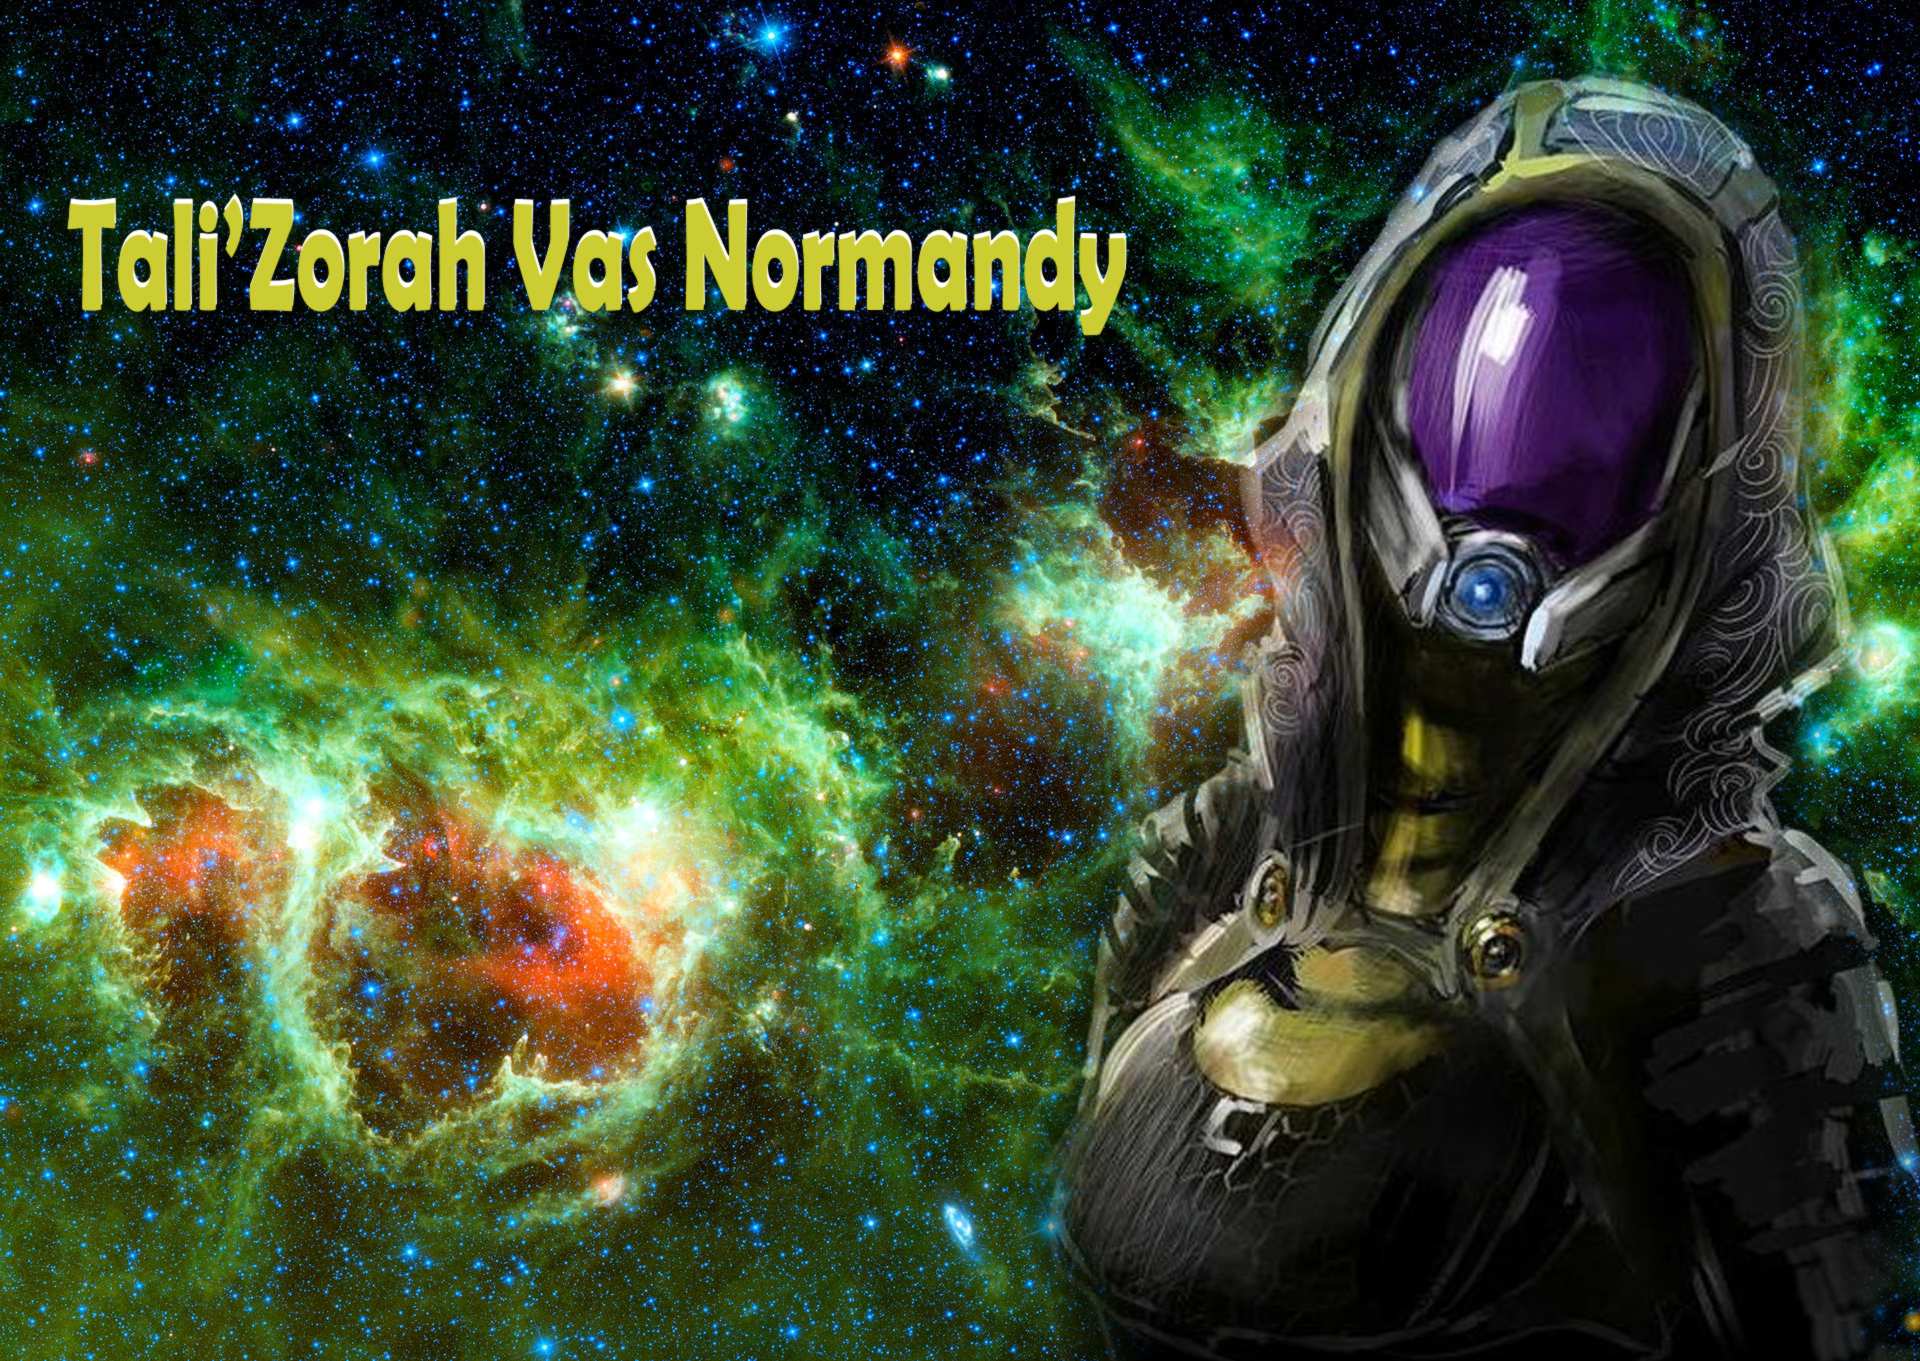 Tali Zorah Vas Normandy Wallpaper With The Heart And Soul Nebulae In